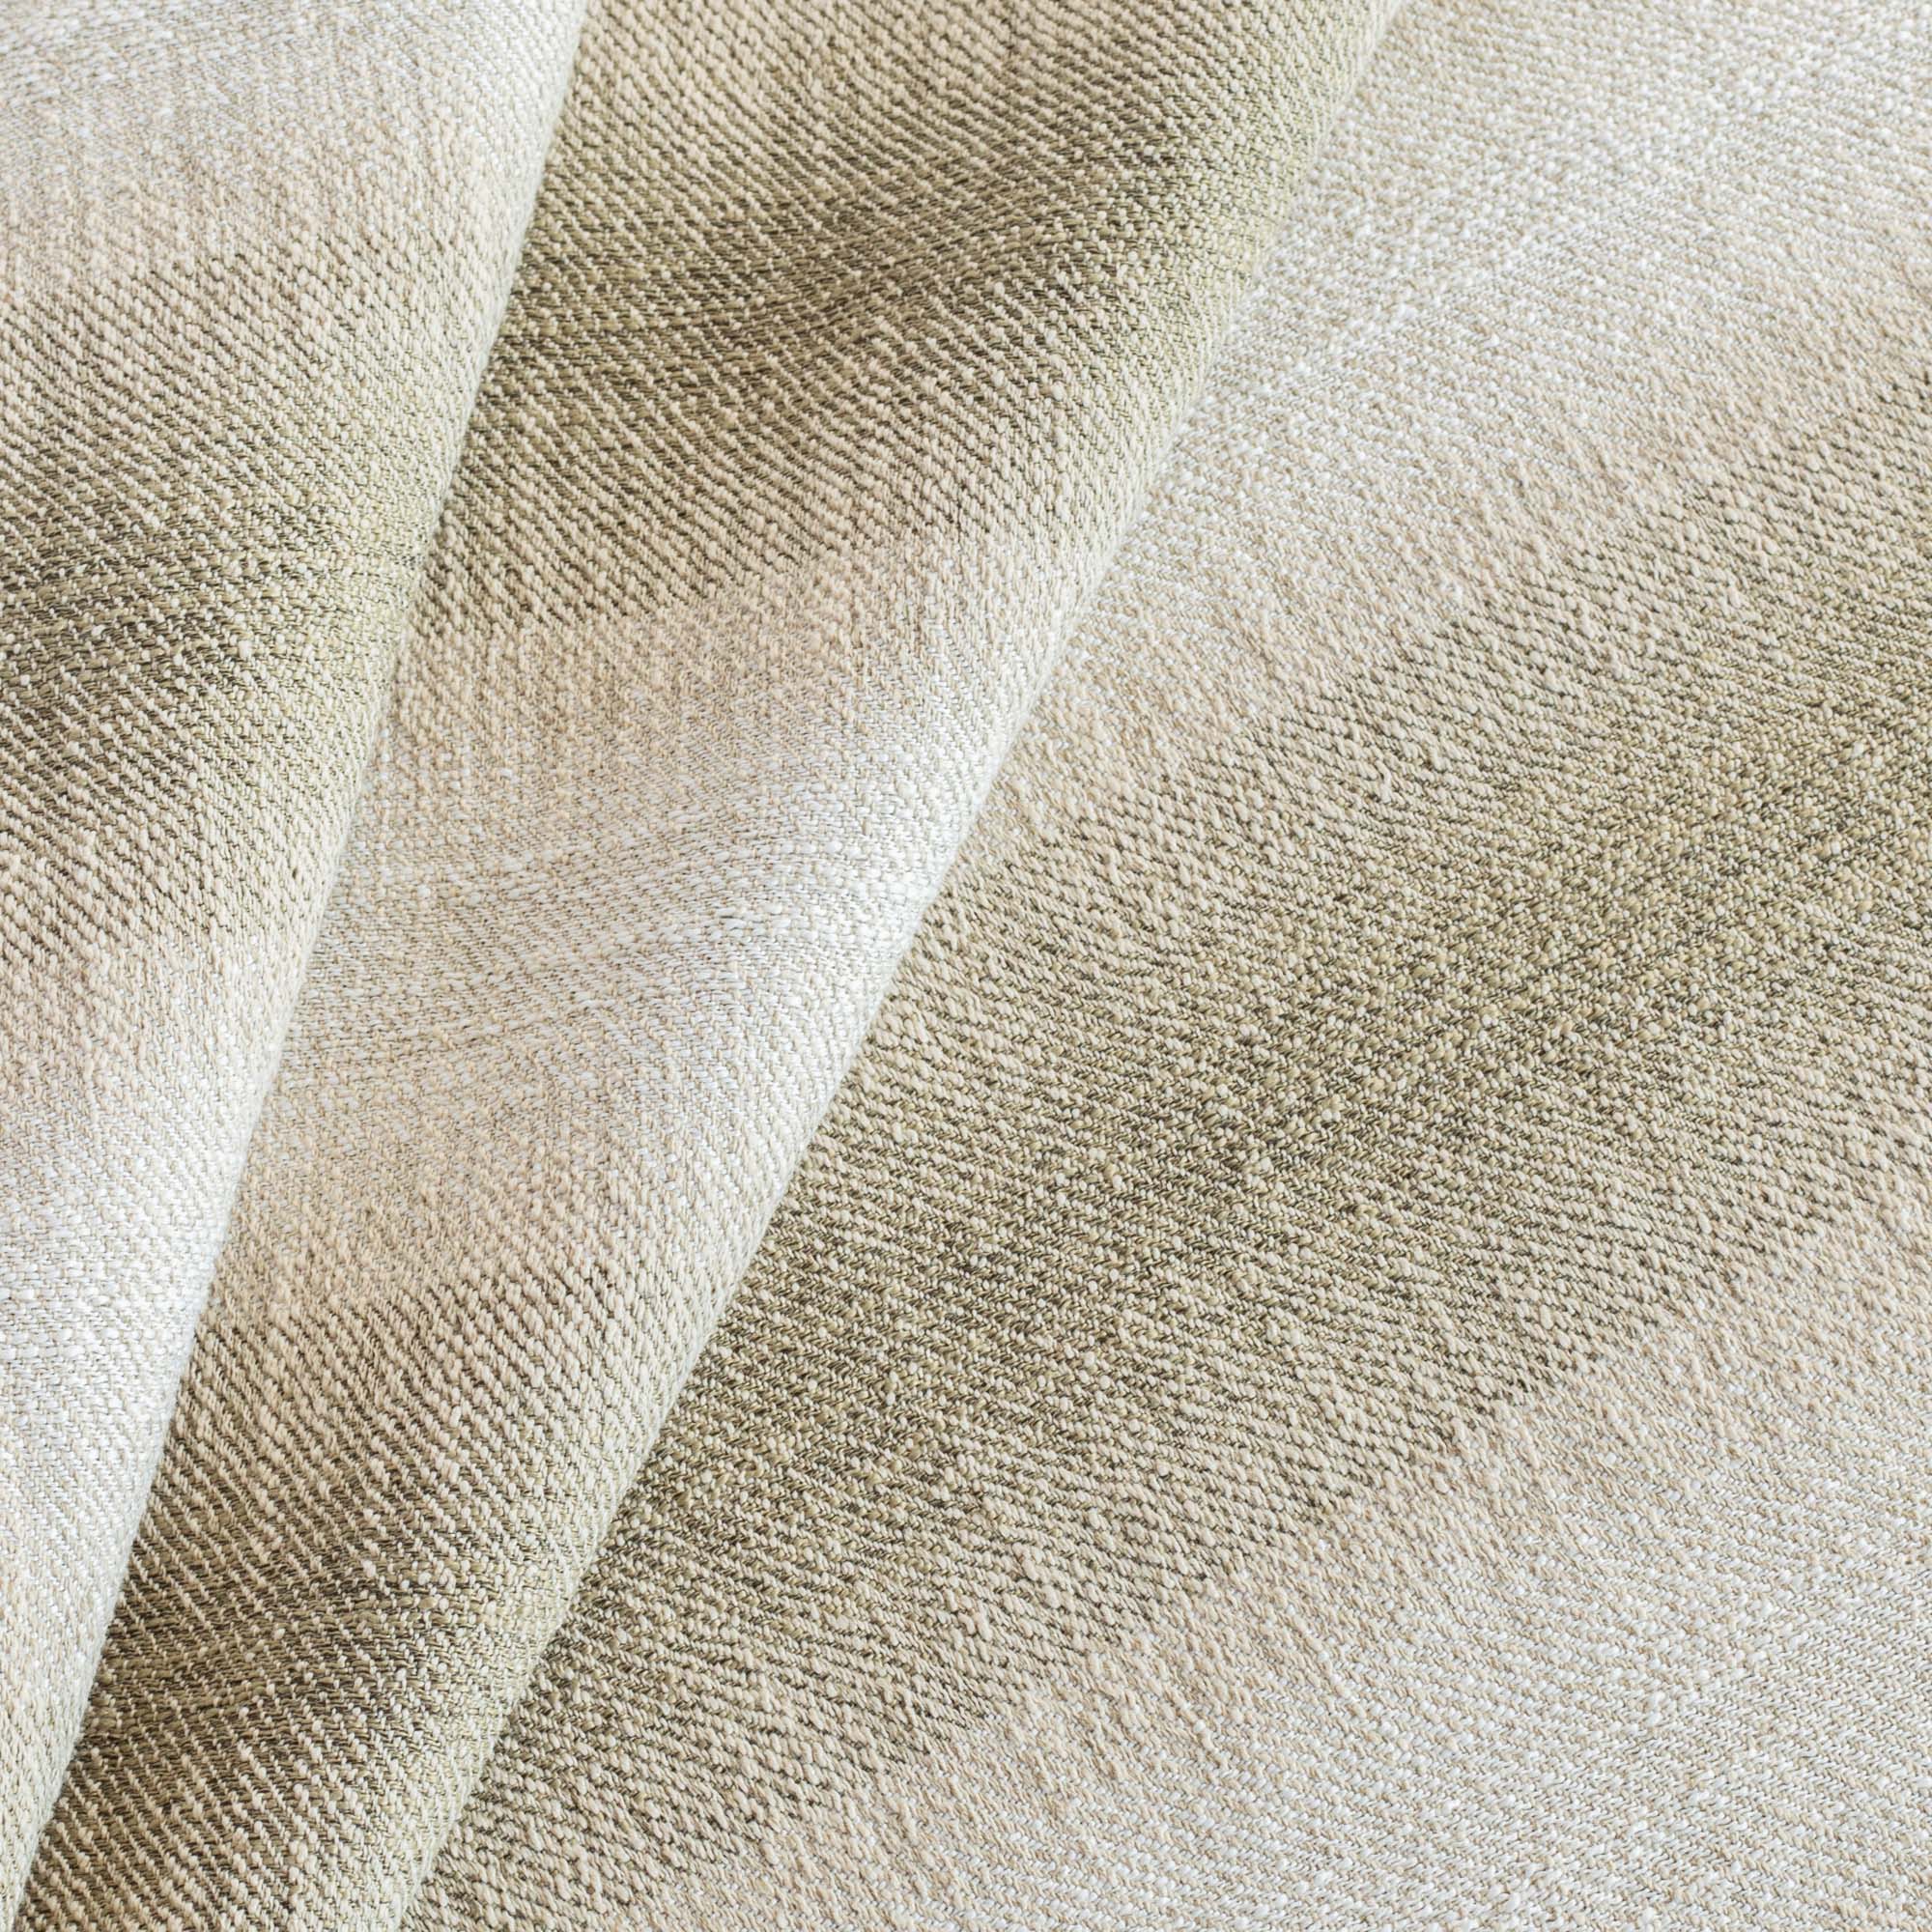 a moss green and sandy cream wide ombre striped home decor fabric